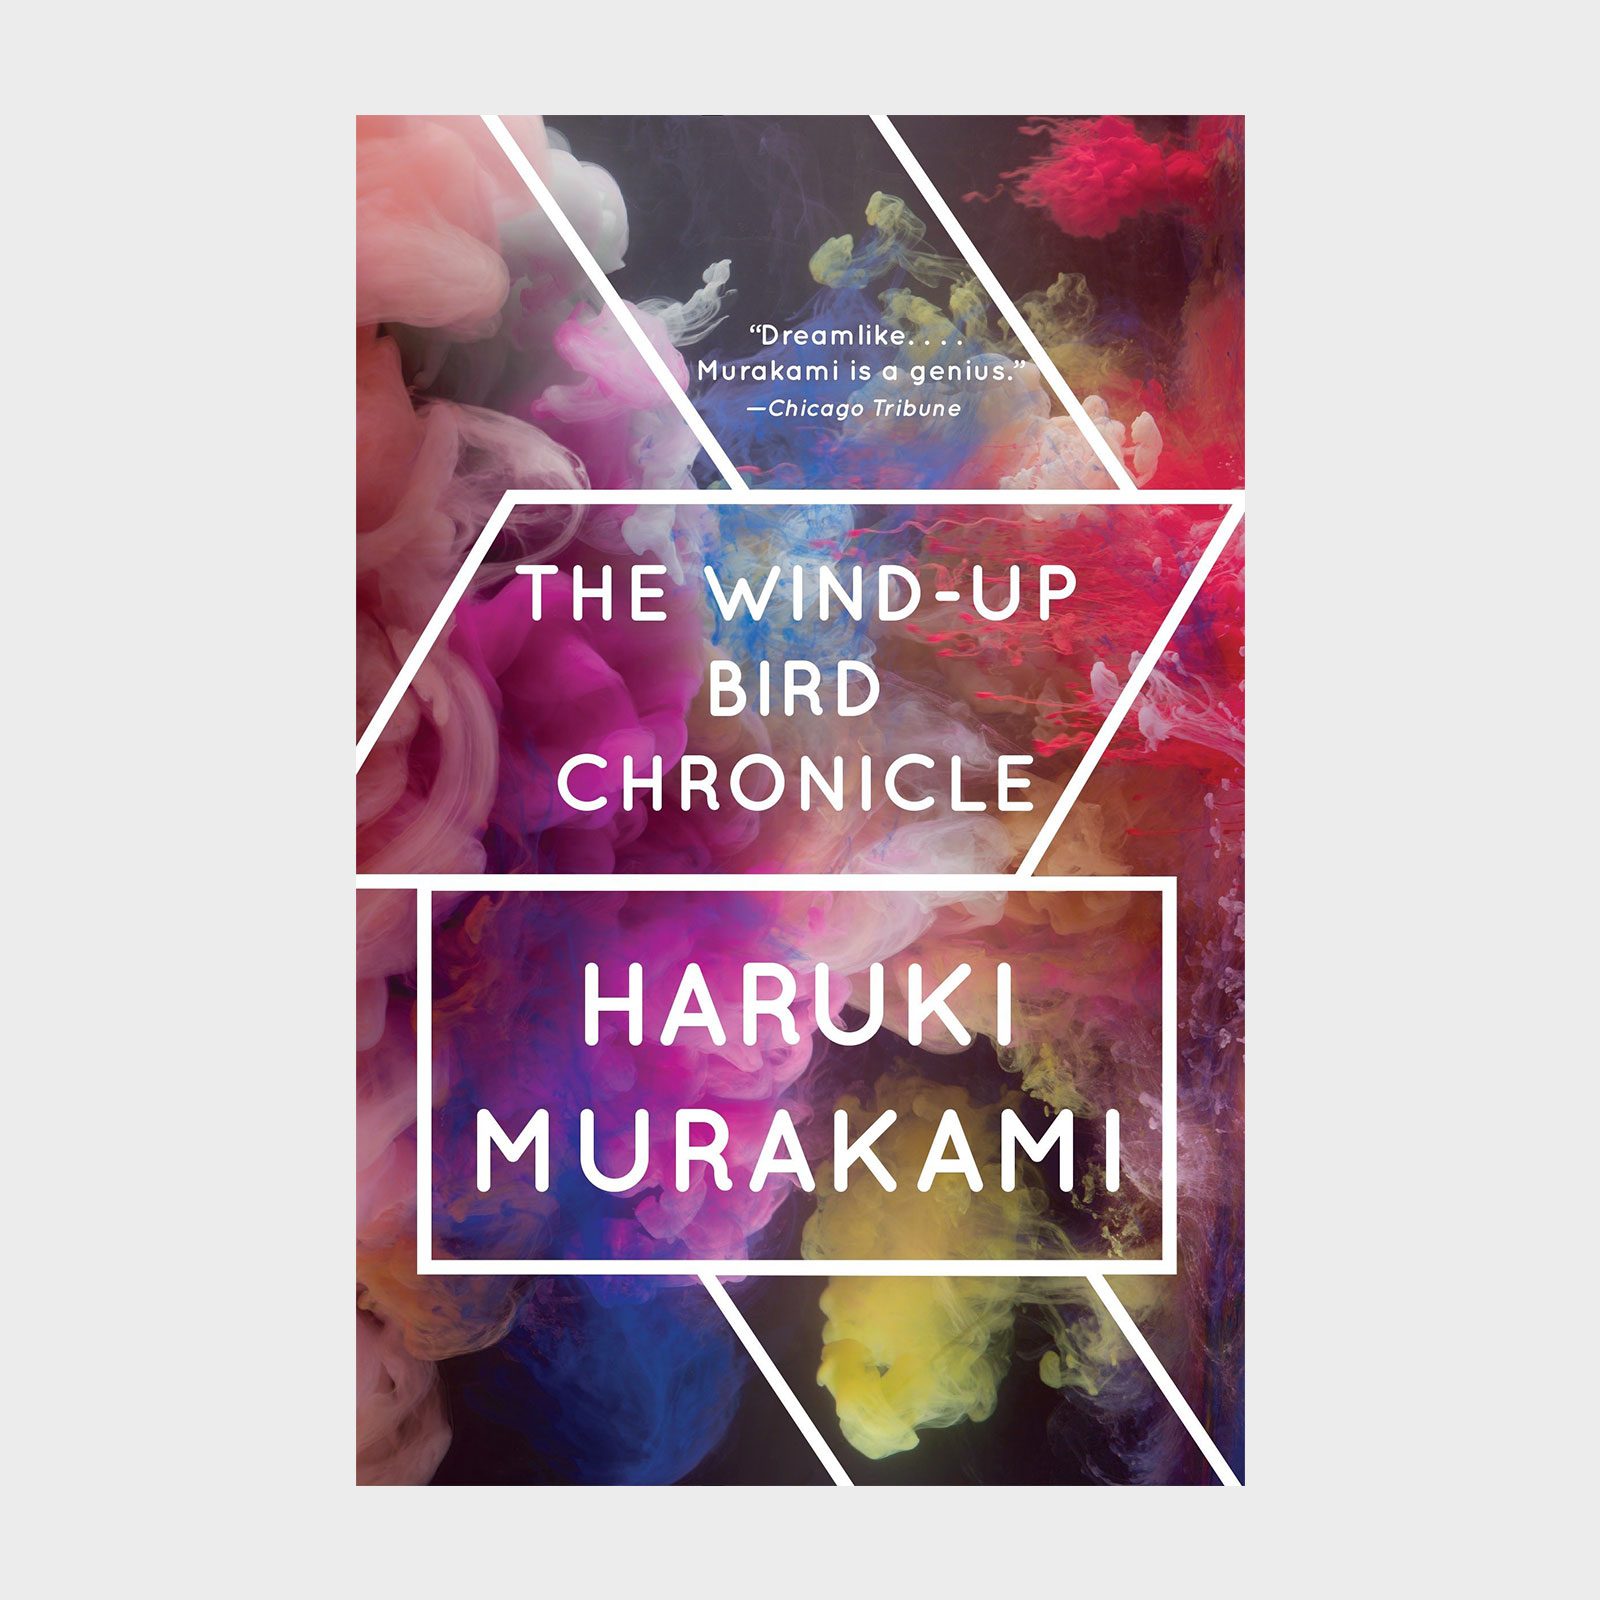 <p>Published in 1994 by one of Japan's most celebrated novelists, <a href="https://www.amazon.com/Wind-Up-Bird-Chronicle-Novel/dp/0679775439" rel="noopener noreferrer"><em>The Wind-Up Bird Chronicle</em></a> tells the story of an ordinary man and his extraordinary journey as he searches for his missing cat and his missing wife, and as he traverses alternate realities at the bottom of a well. The surreal story explores Japanese nationalism, evolving relationships and the search for meaning.</p> <p>Though literary scholars typically point to novels by Latin American authors when discussing magical realism books, Haruki Murakami himself points out the connection between such tales and <a href="https://www.rd.com/list/asian-american-books/" rel="noopener noreferrer">Asian writers</a>. "In Japan, I think that other world is very close to our real life, and if we decide to go to the other side, it's not so difficult," he told the <em>New Yorker</em>. "I get the impression that in the Western world, it isn't so easy to go to the other side; you have to go through some trials to get to the other world. But in Japan, if you want to go there, you go there. So in my stories, if you go down to the bottom of a well, there's another world. And you can't necessarily tell the difference between this side and the other side."</p> <p class="listicle-page__cta-button-shop">Shop Now</p>